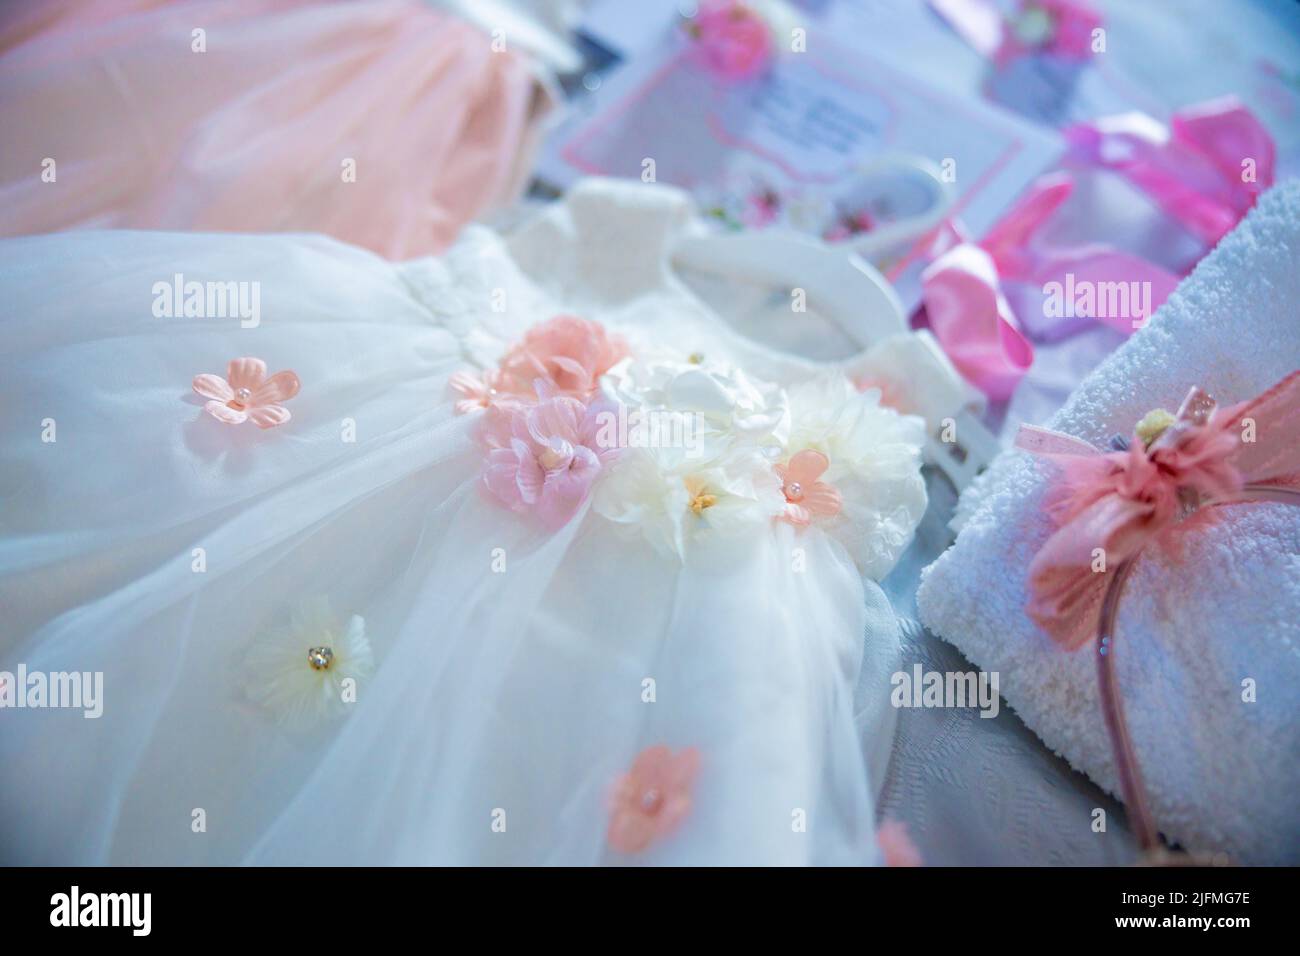 Baptism pictures. White gown baby with pink flowers outfit for religious celebration after birth. High quality photo Stock Photo